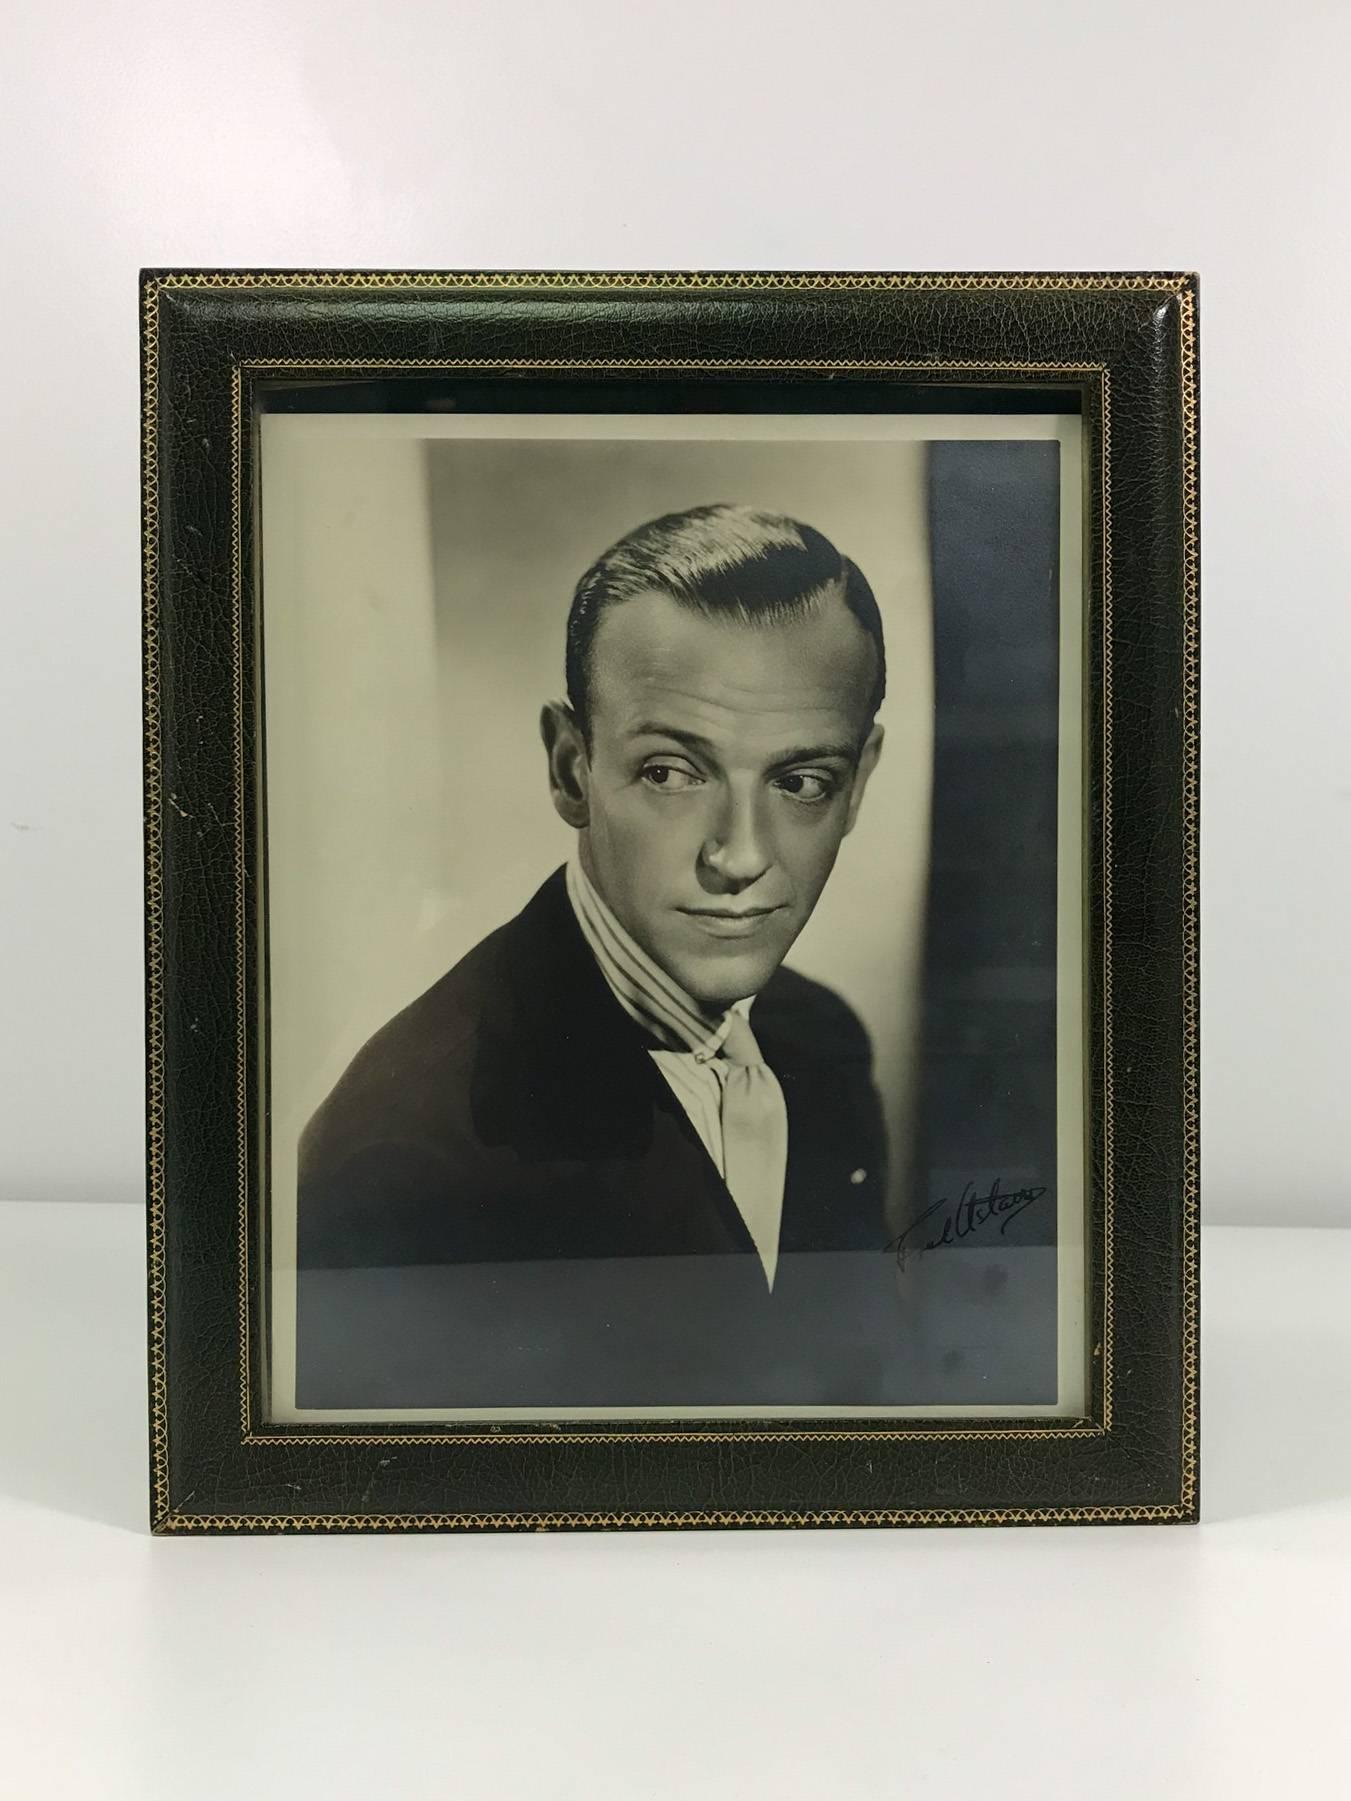 Fred Astaire (May 10, 1899-June 22, 1987) original signed portrait in a green Asprey signed frame made of Moroccan book-binder leather with gilded trim. Both photograph and frame date from the 1940s and exhibit normal wear consistent with age and